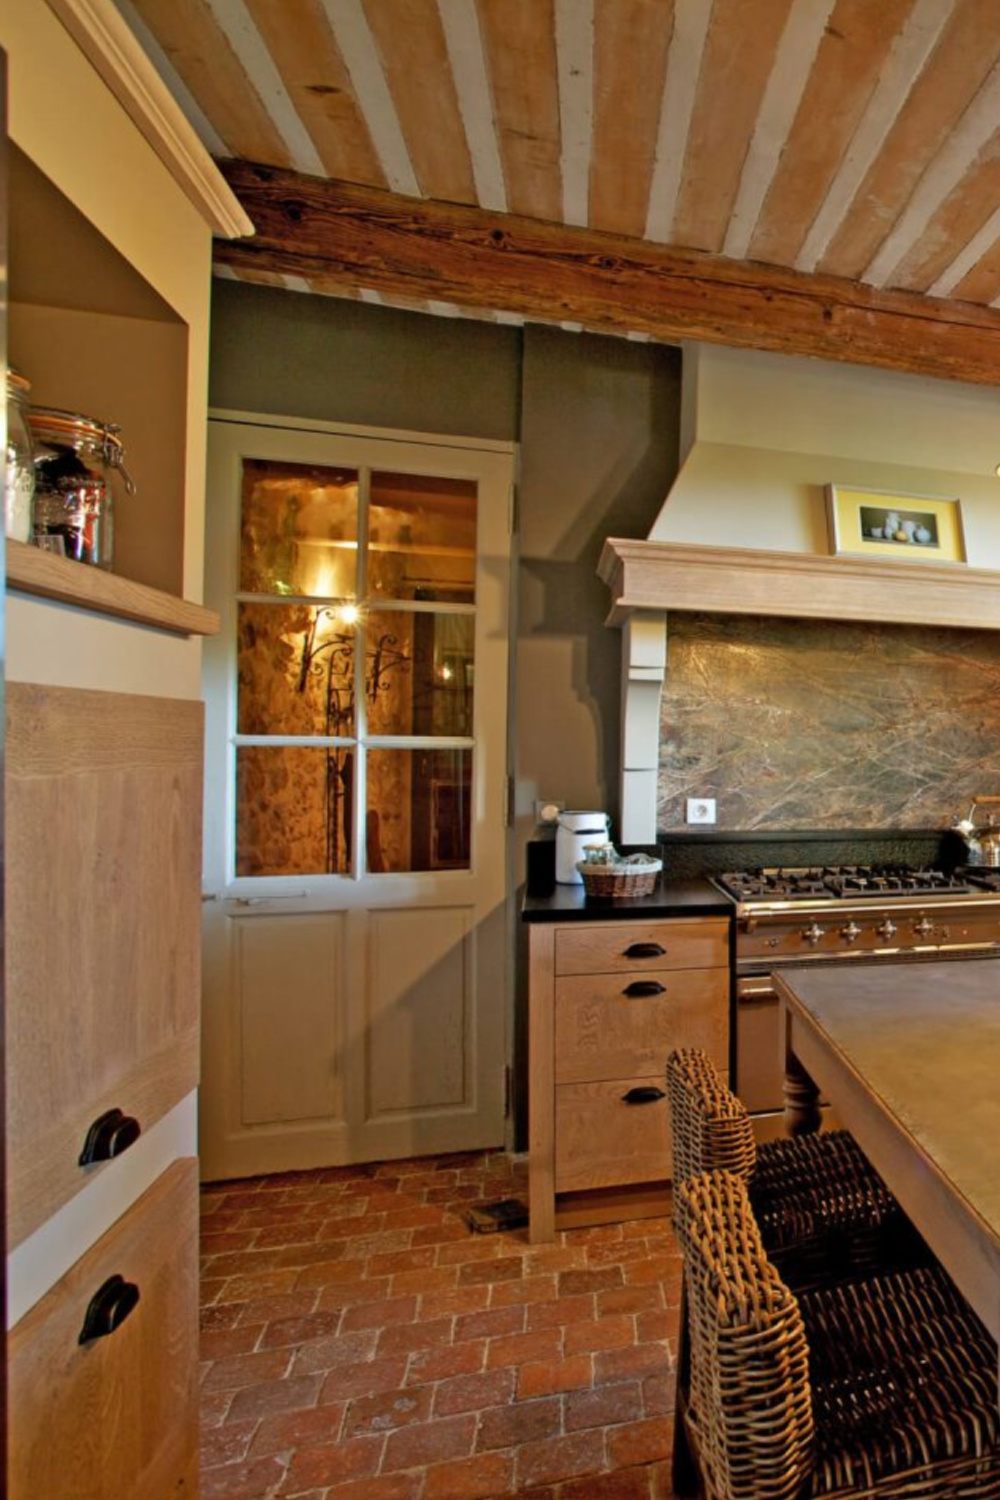 Beautiful French kitchen in Provence with glass door to hall - Haven In. #frenchkitchen #frenchfarmhouse #oldworldkitchen